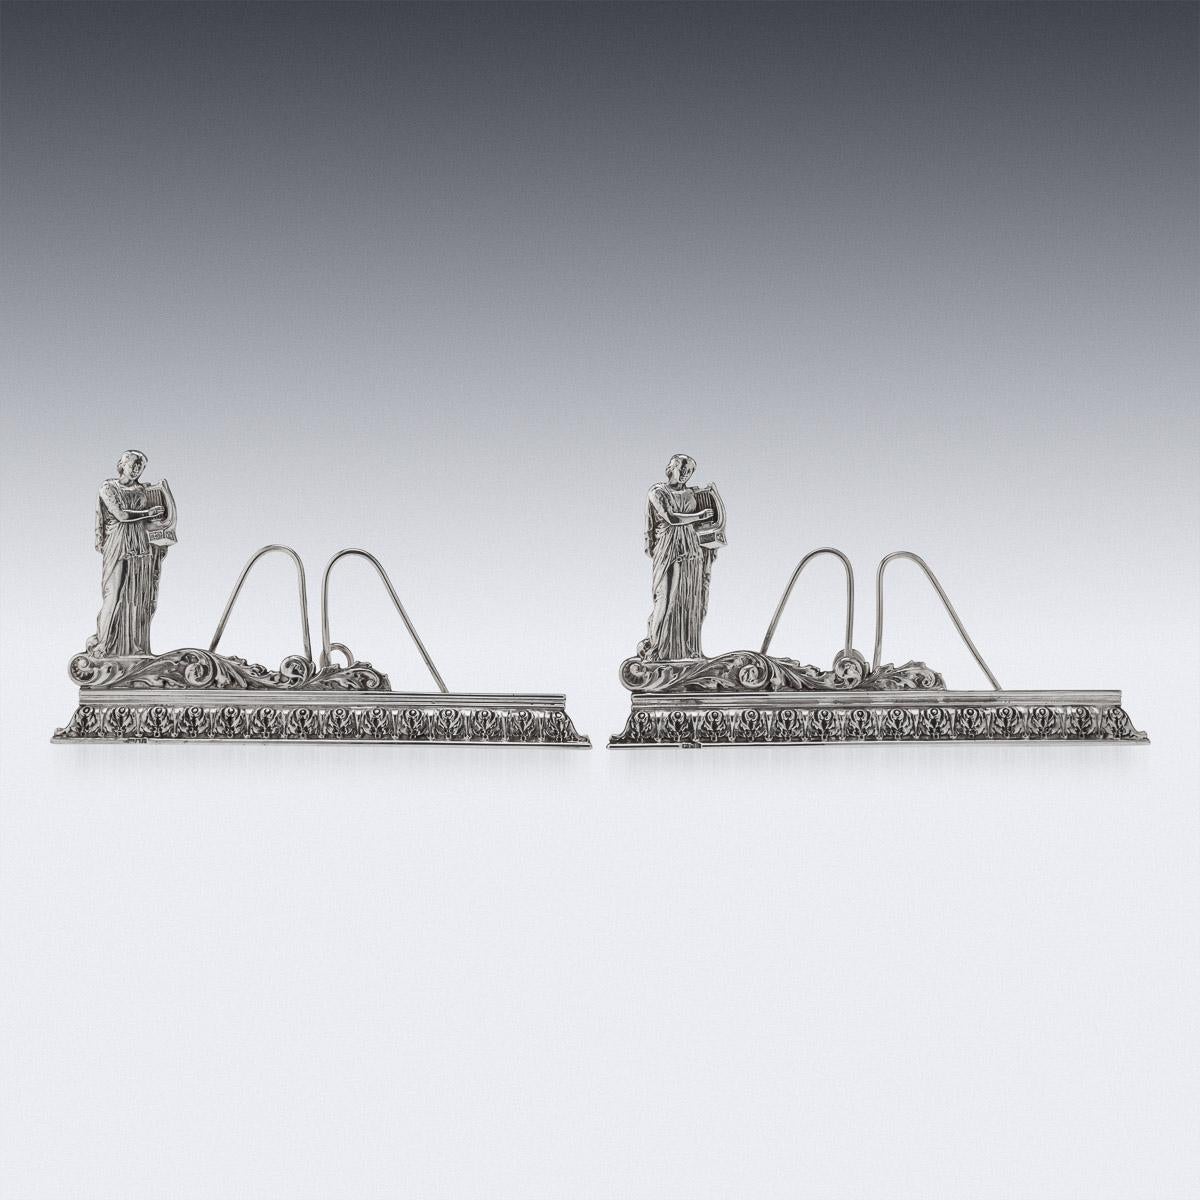 British 20th Century English Solid Silver Music Sheet Stands, Carrington & Co, c.1910 For Sale